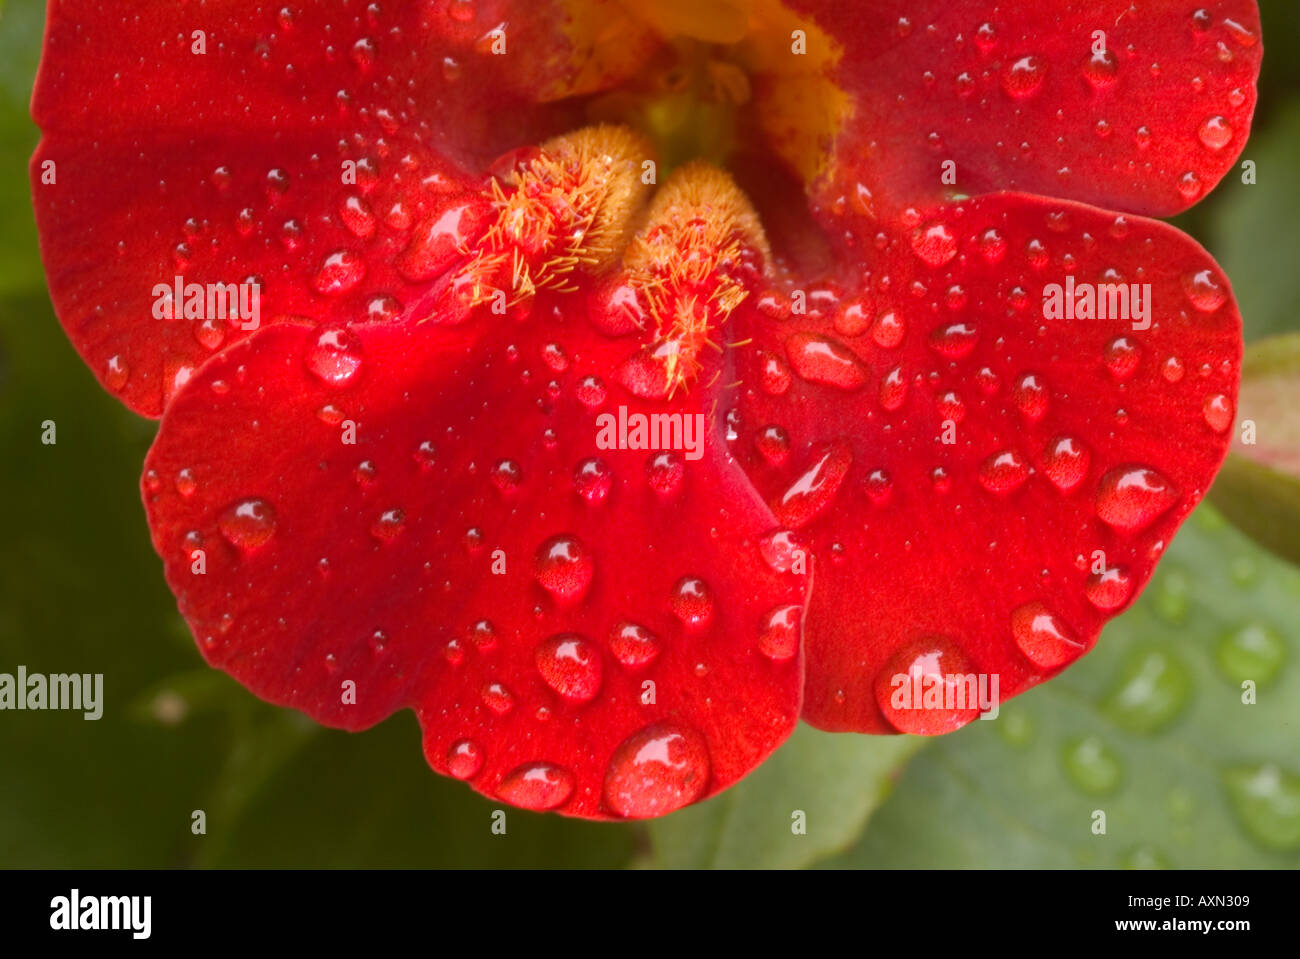 Red Mimulus flower with water droplets Stock Photo